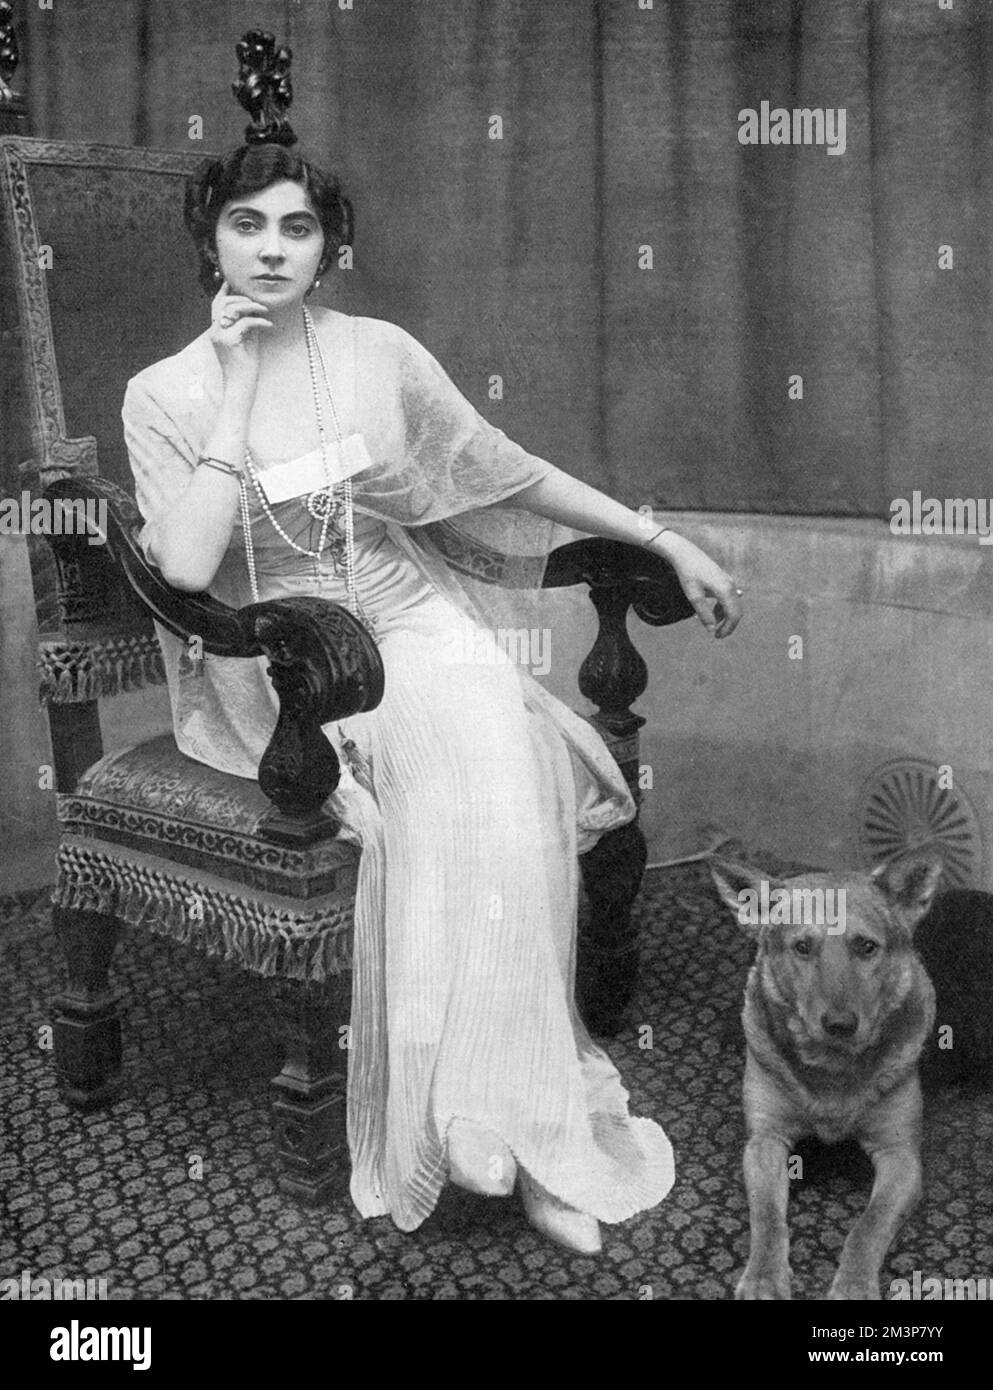 Constance Edwina (n&#x9960;Cornwallis West), Duchess of Westminster (later Mrs James Fitzpatrick Lewes) (died 1970), First wife of 2nd Duke of Westminster. She set up and ran a hospital in the casino at Le Touquet during the First World War. Interestingly, the dog at her feet looks suspiciously like a German Shepherd!       Date: 1914 Stock Photo